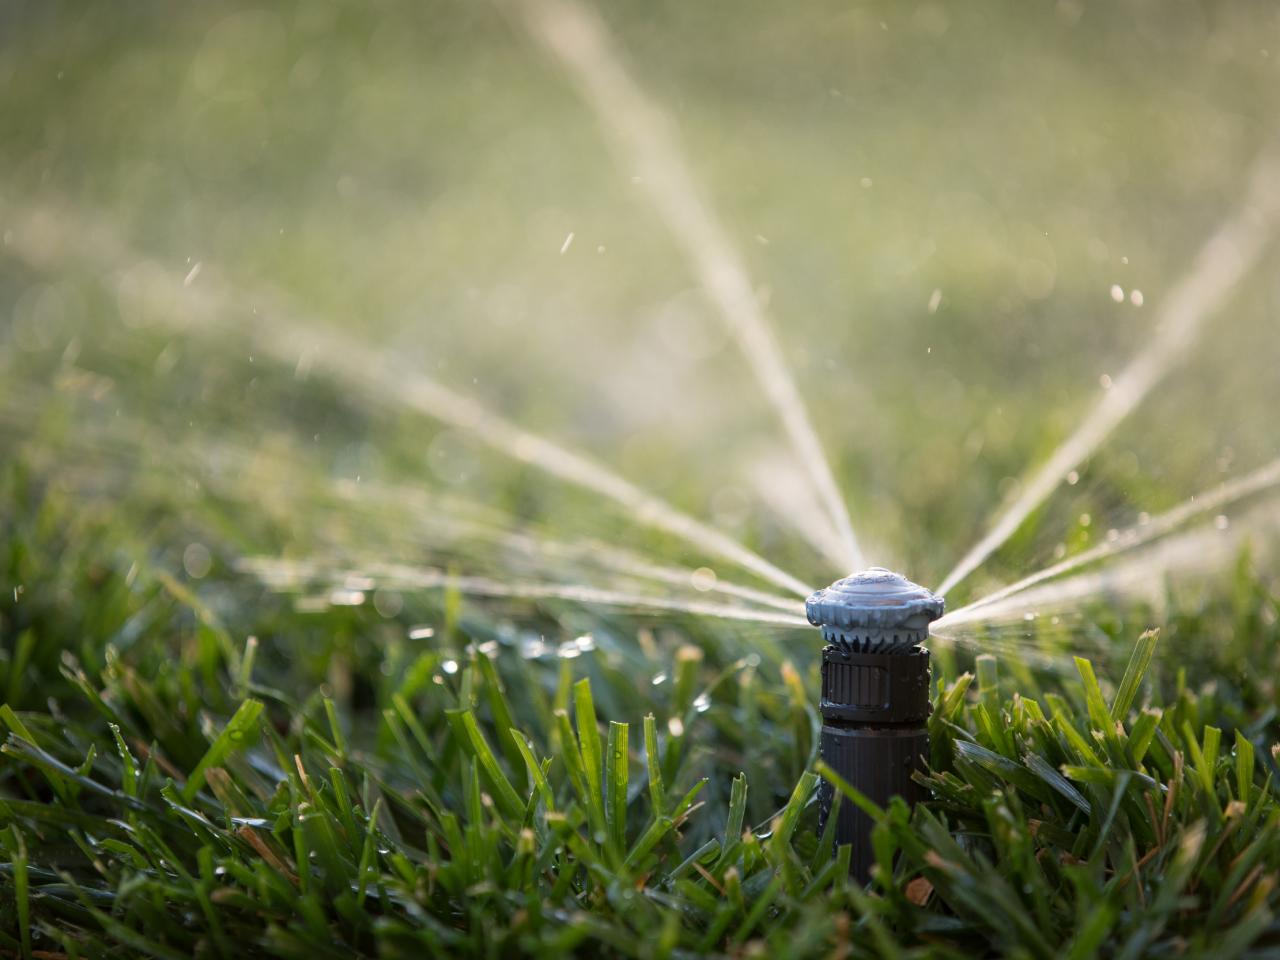 Why Do I Need a Sprinkler Wrench and Spare Sprinklers?